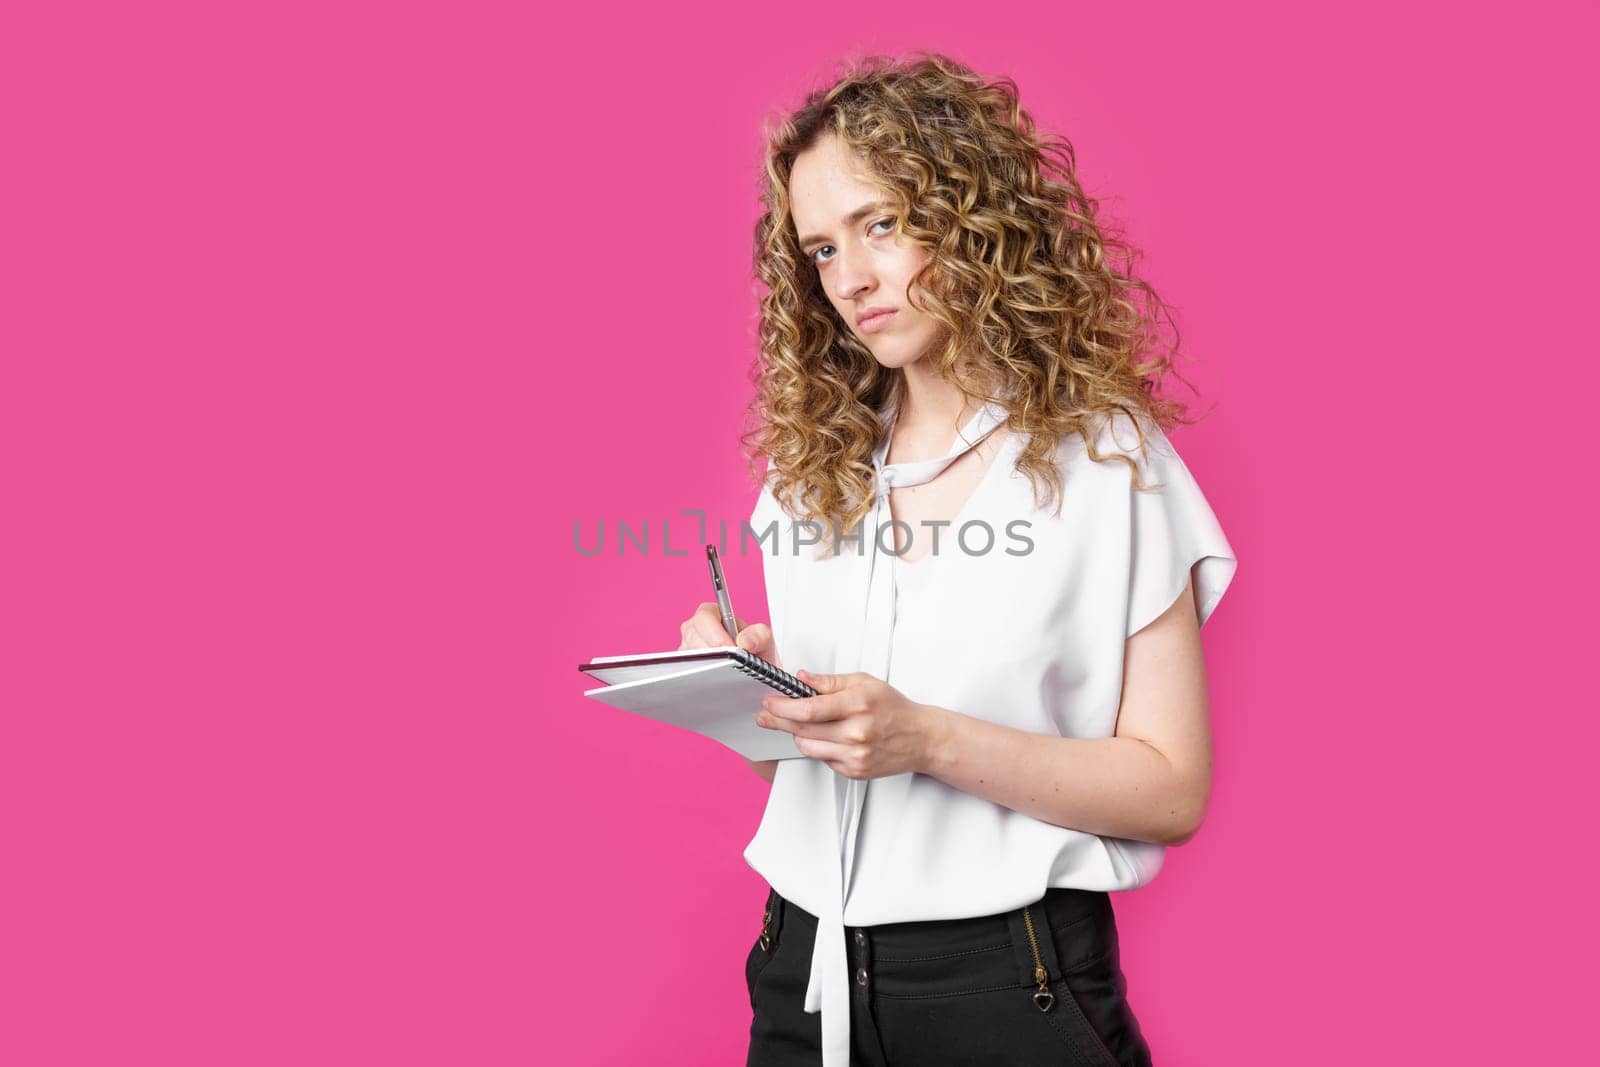 Charming woman makes entries in the diary and looks into the camera. Isolated on a pink background.